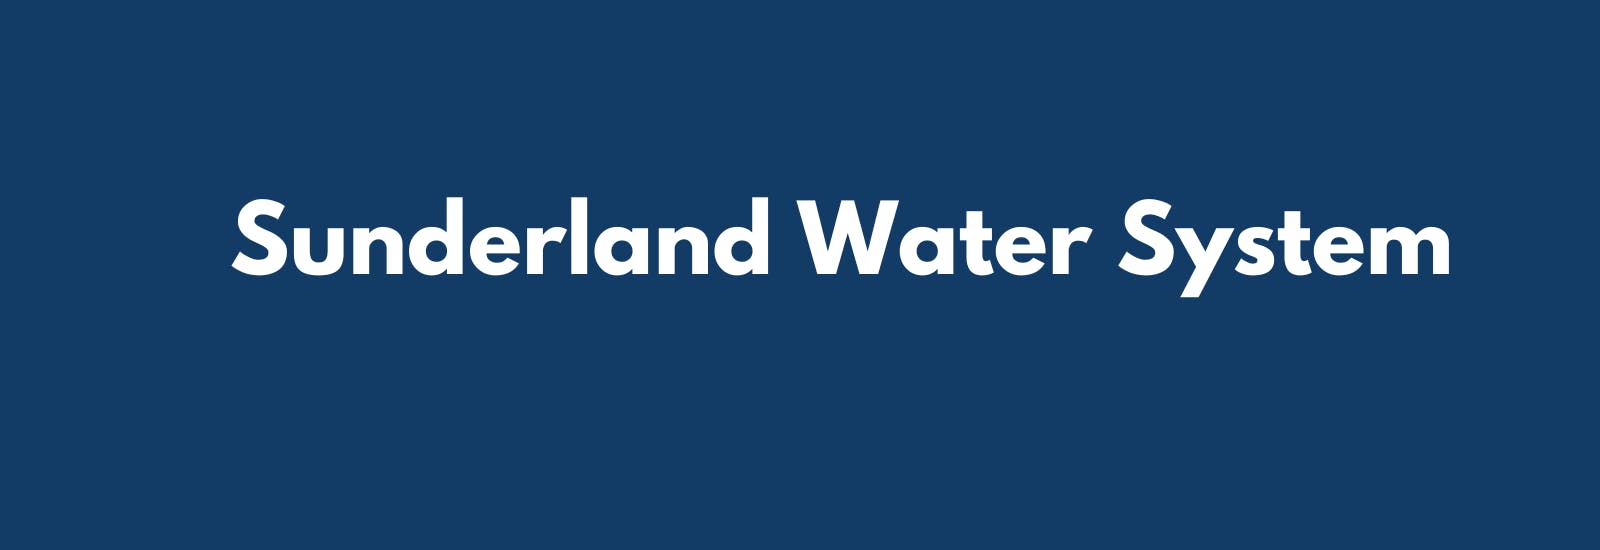 Dark blue background with white text over it that says, Sunderland Water System